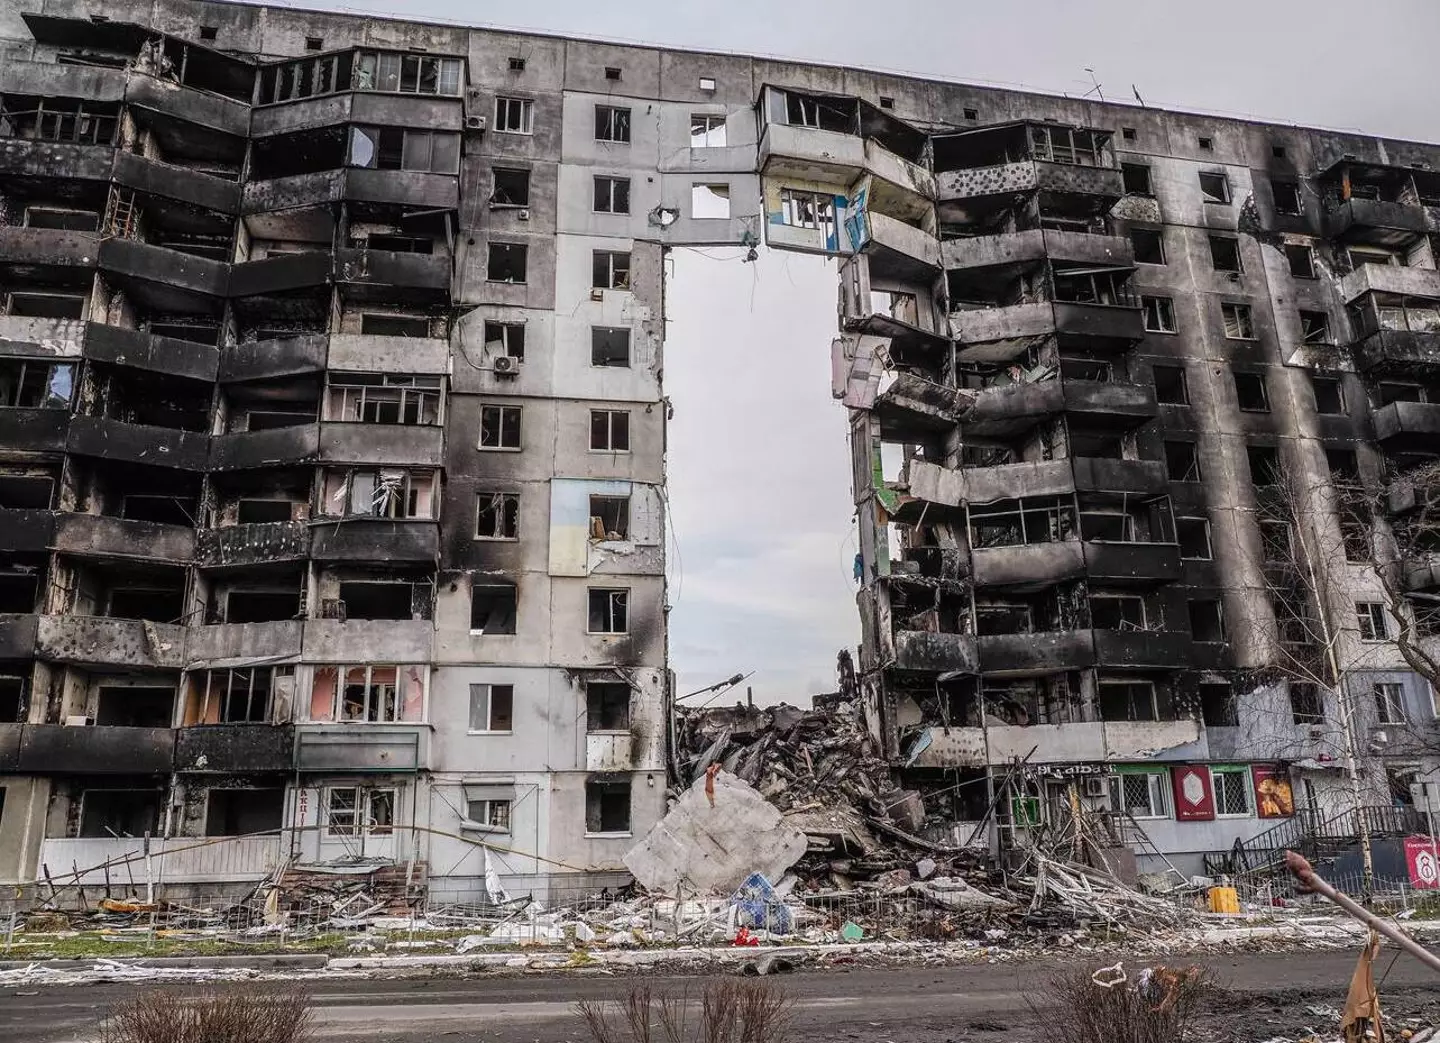 Destroyed building in Ukraine is one of many heavy bombardments the country has seen.